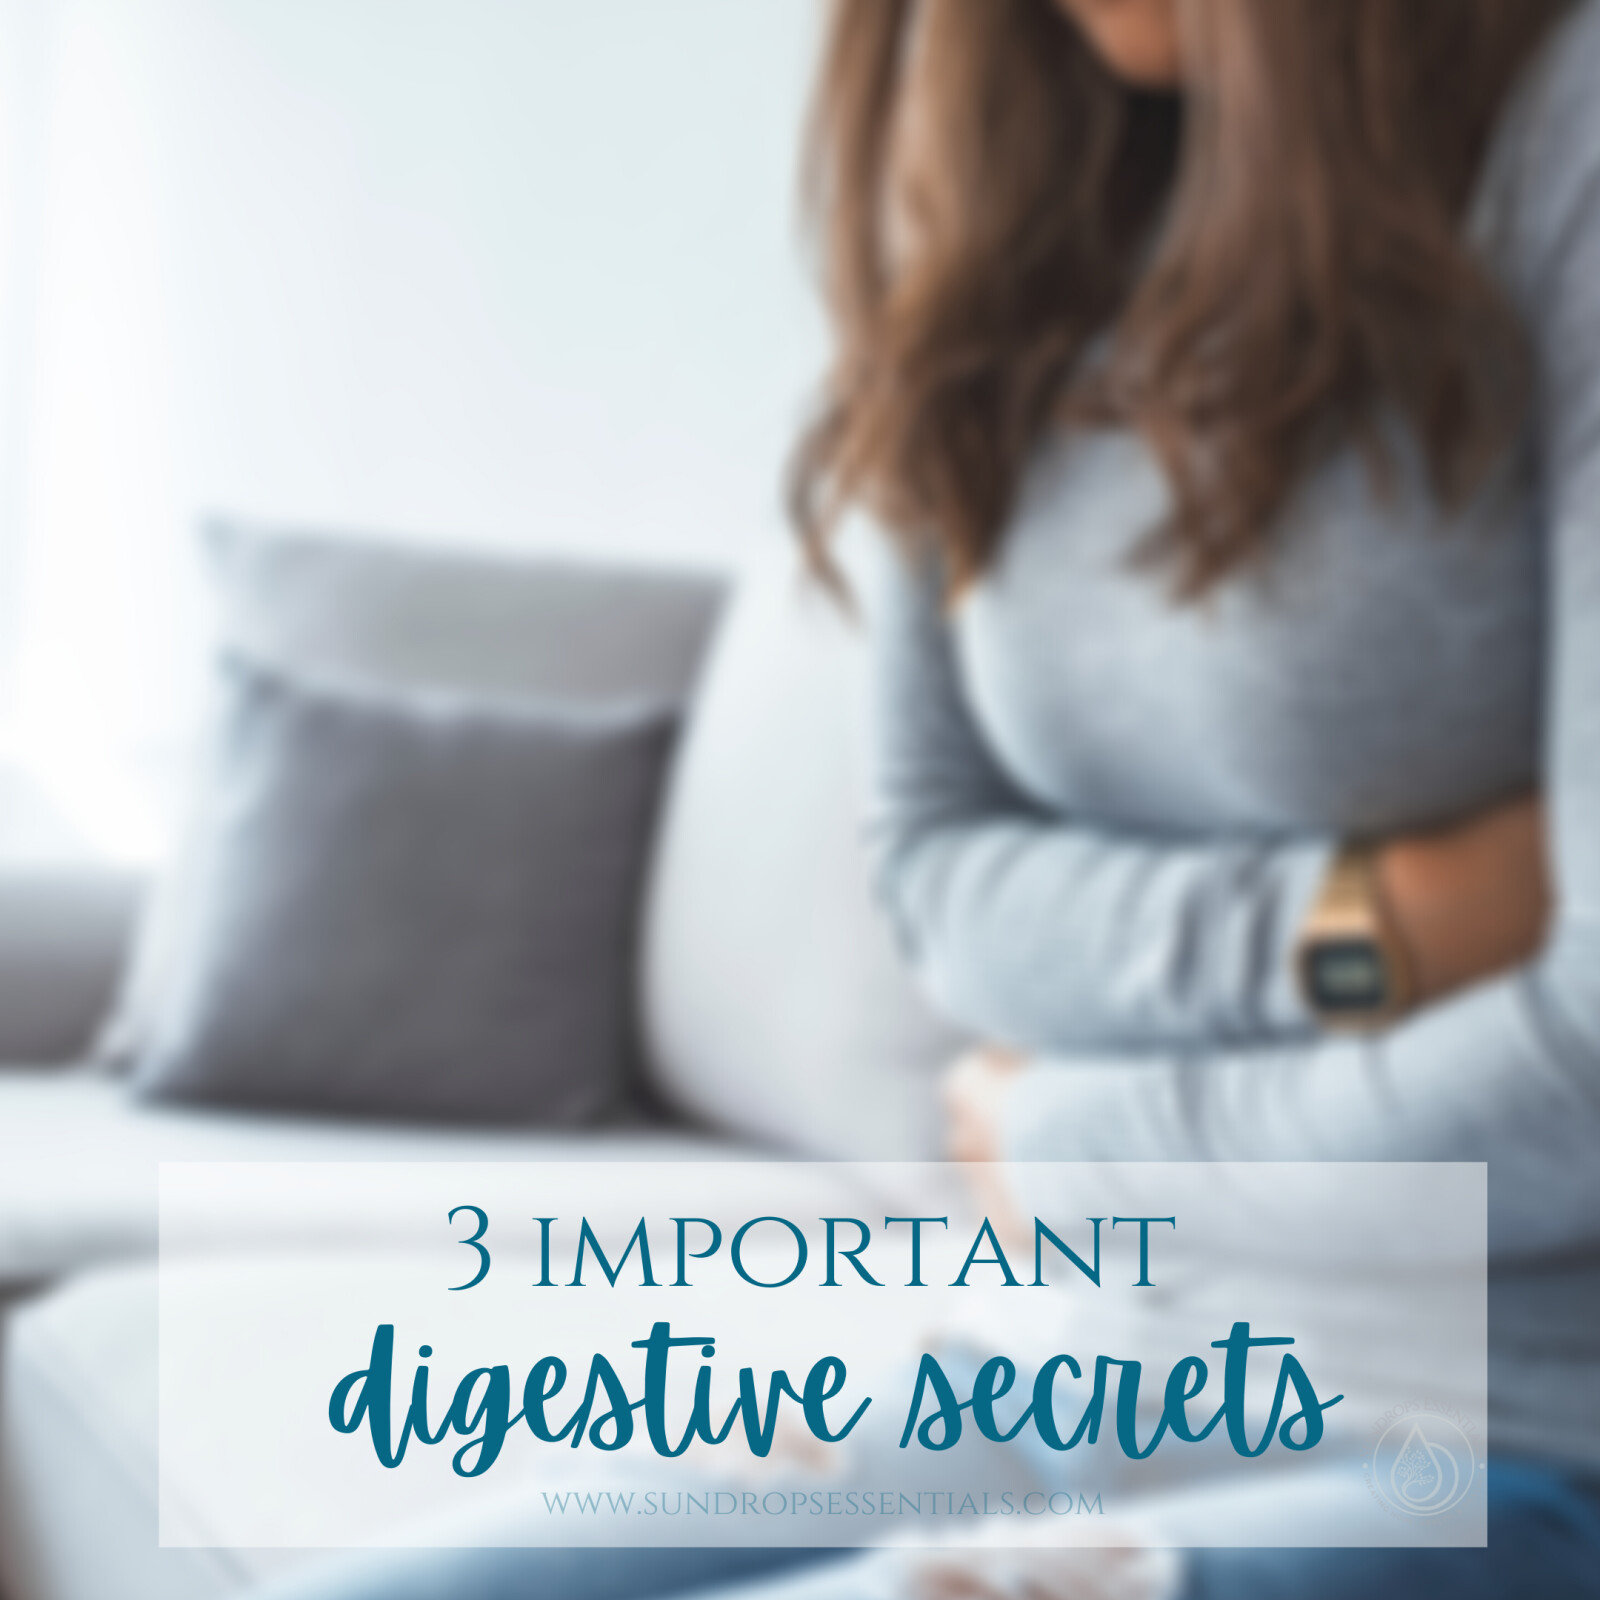 3 Easy Things to Improve Digestion